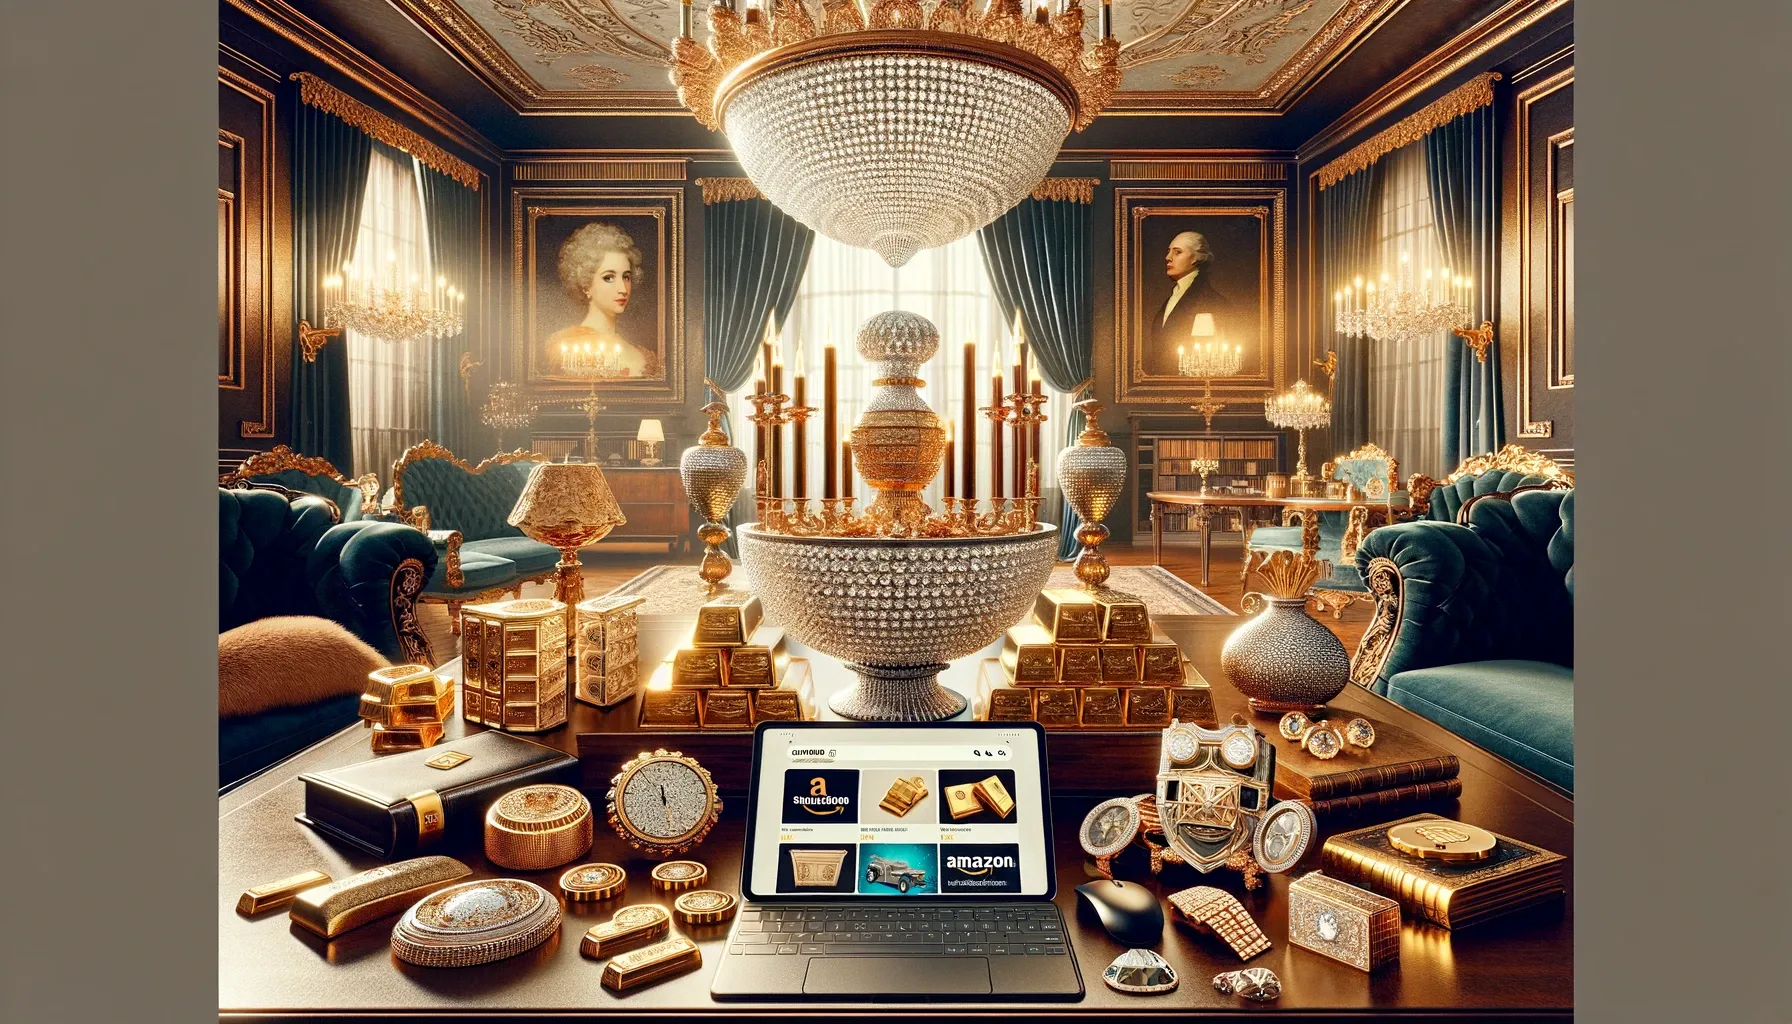 15 Most Expensive Amazon Items: A Look into Luxury and Innovation